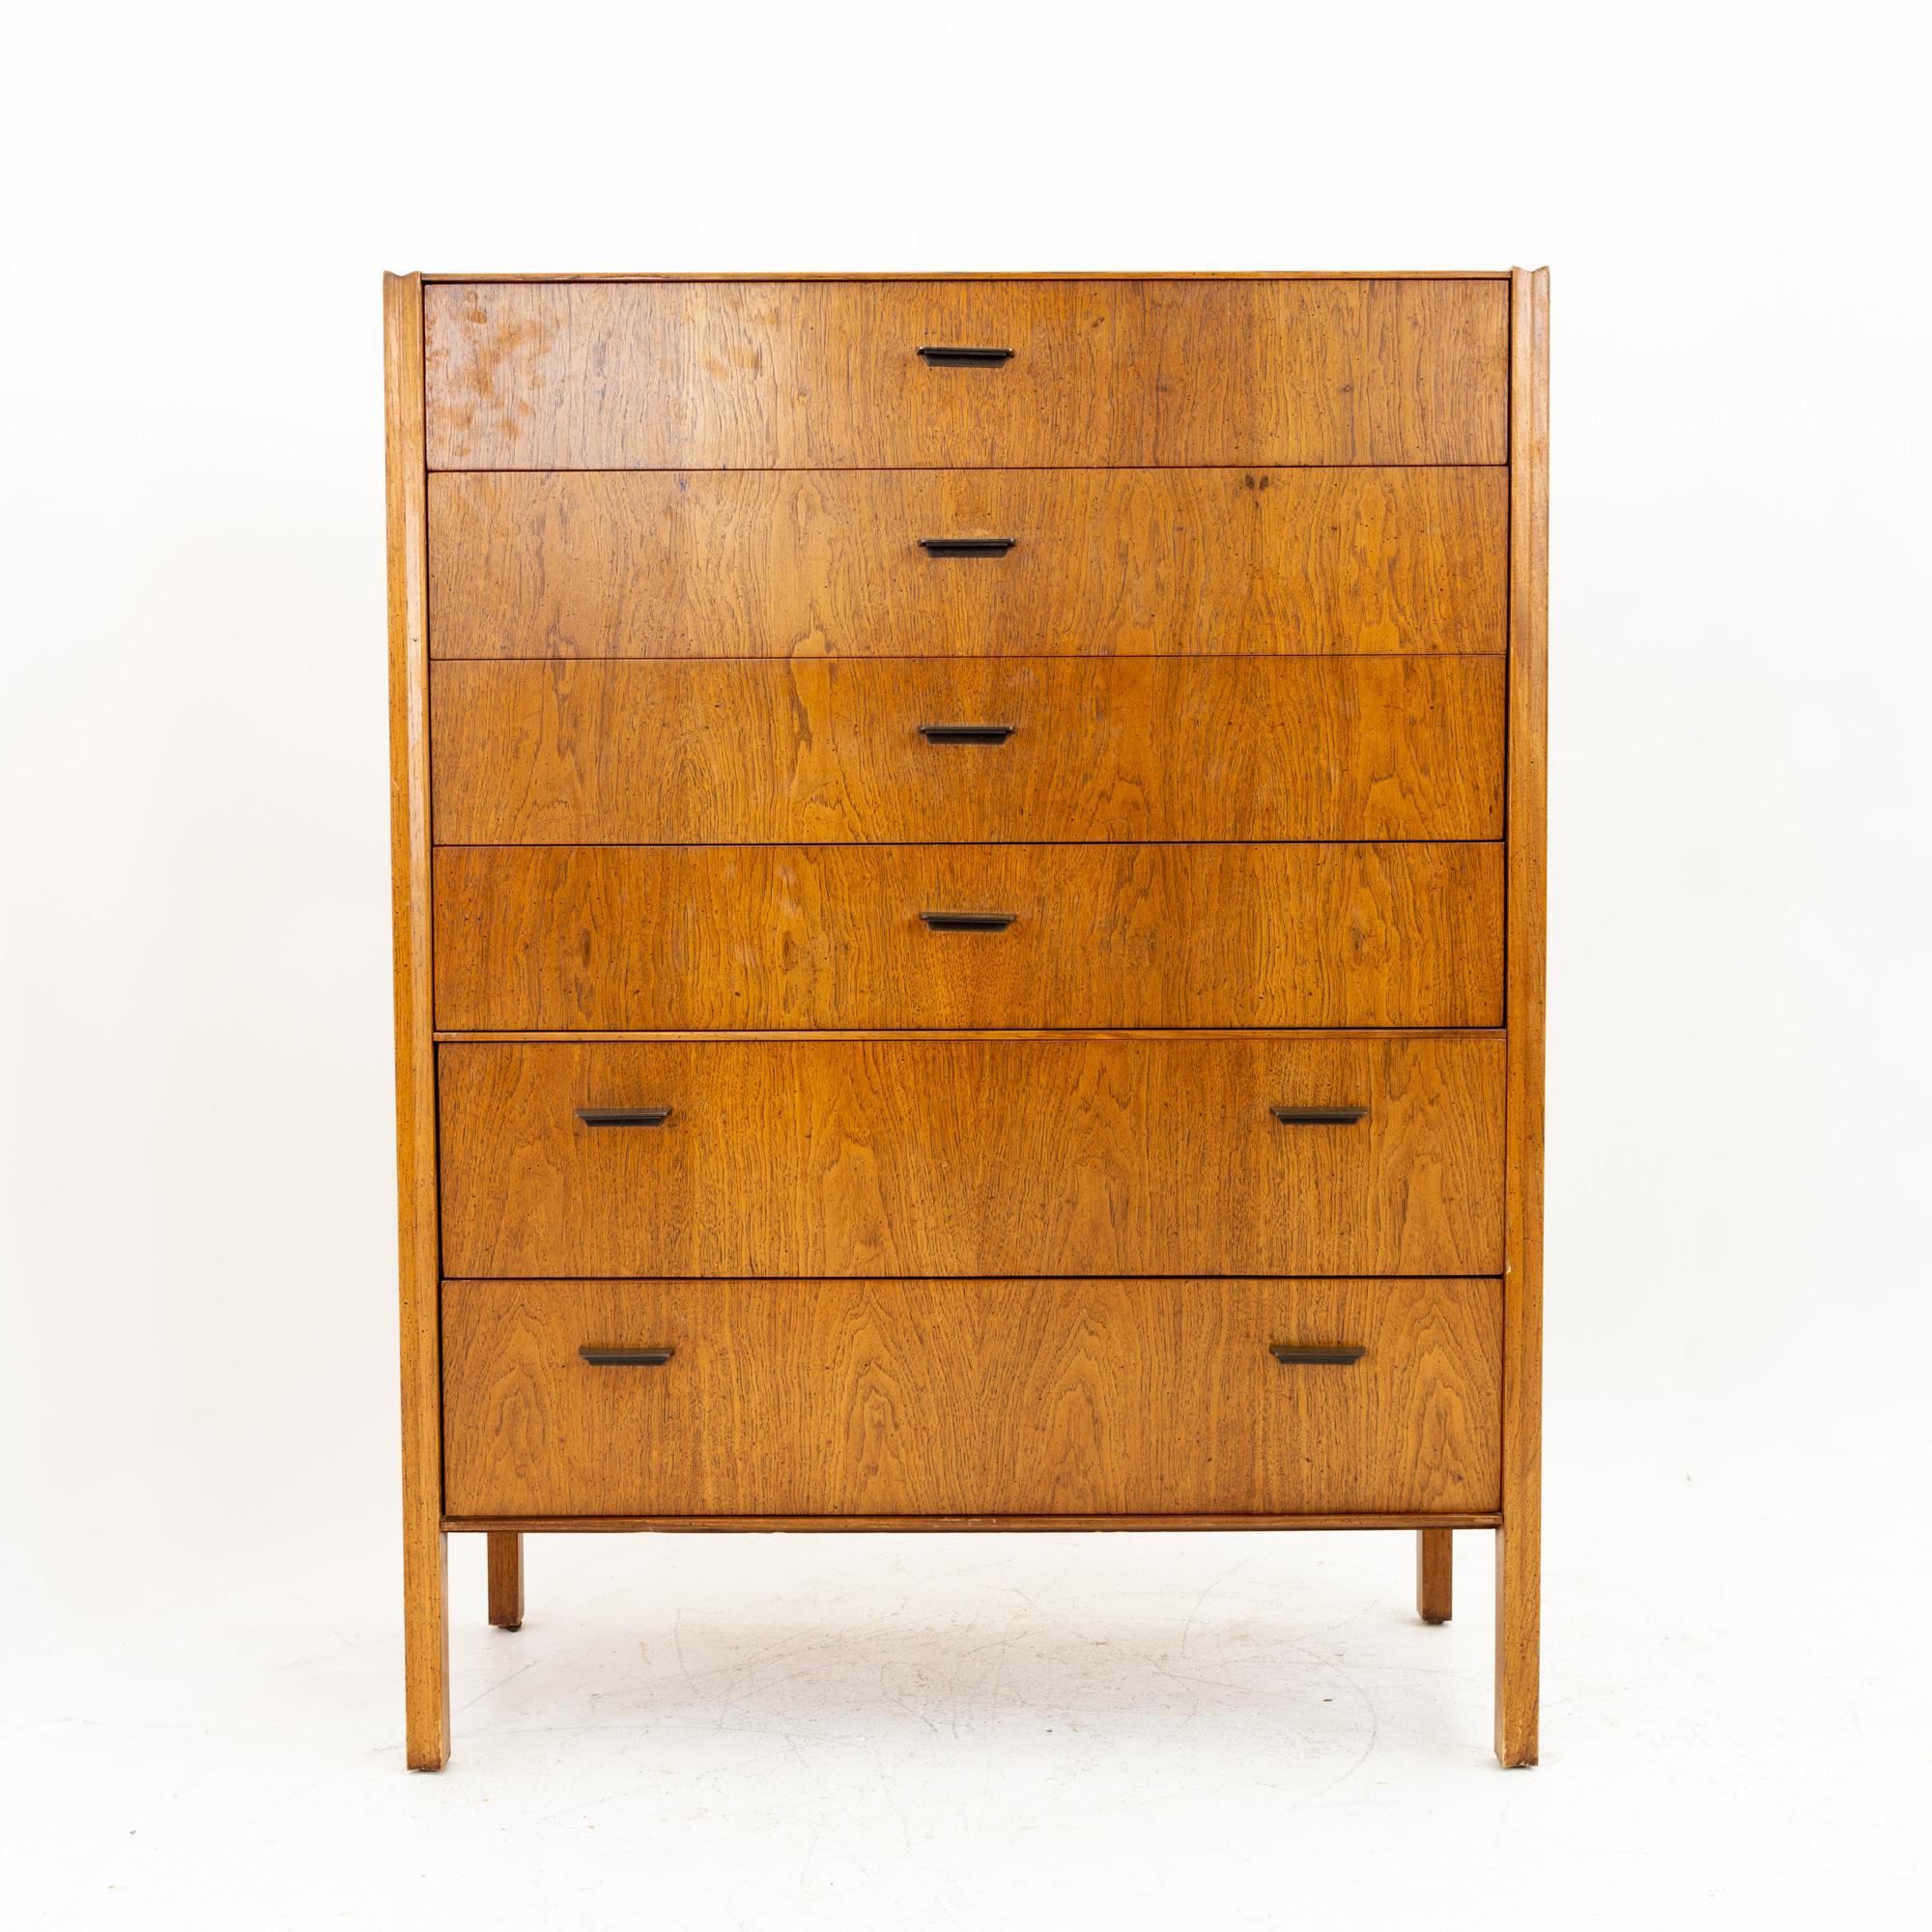 Founders patterns 15 Mid Century oak 6-drawer highboy dresser
This dresser is 37 wide and 19 deep by 48 inches high


This price includes getting this piece in what we call restored vintage condition. That means the piece is permanently fixed upon